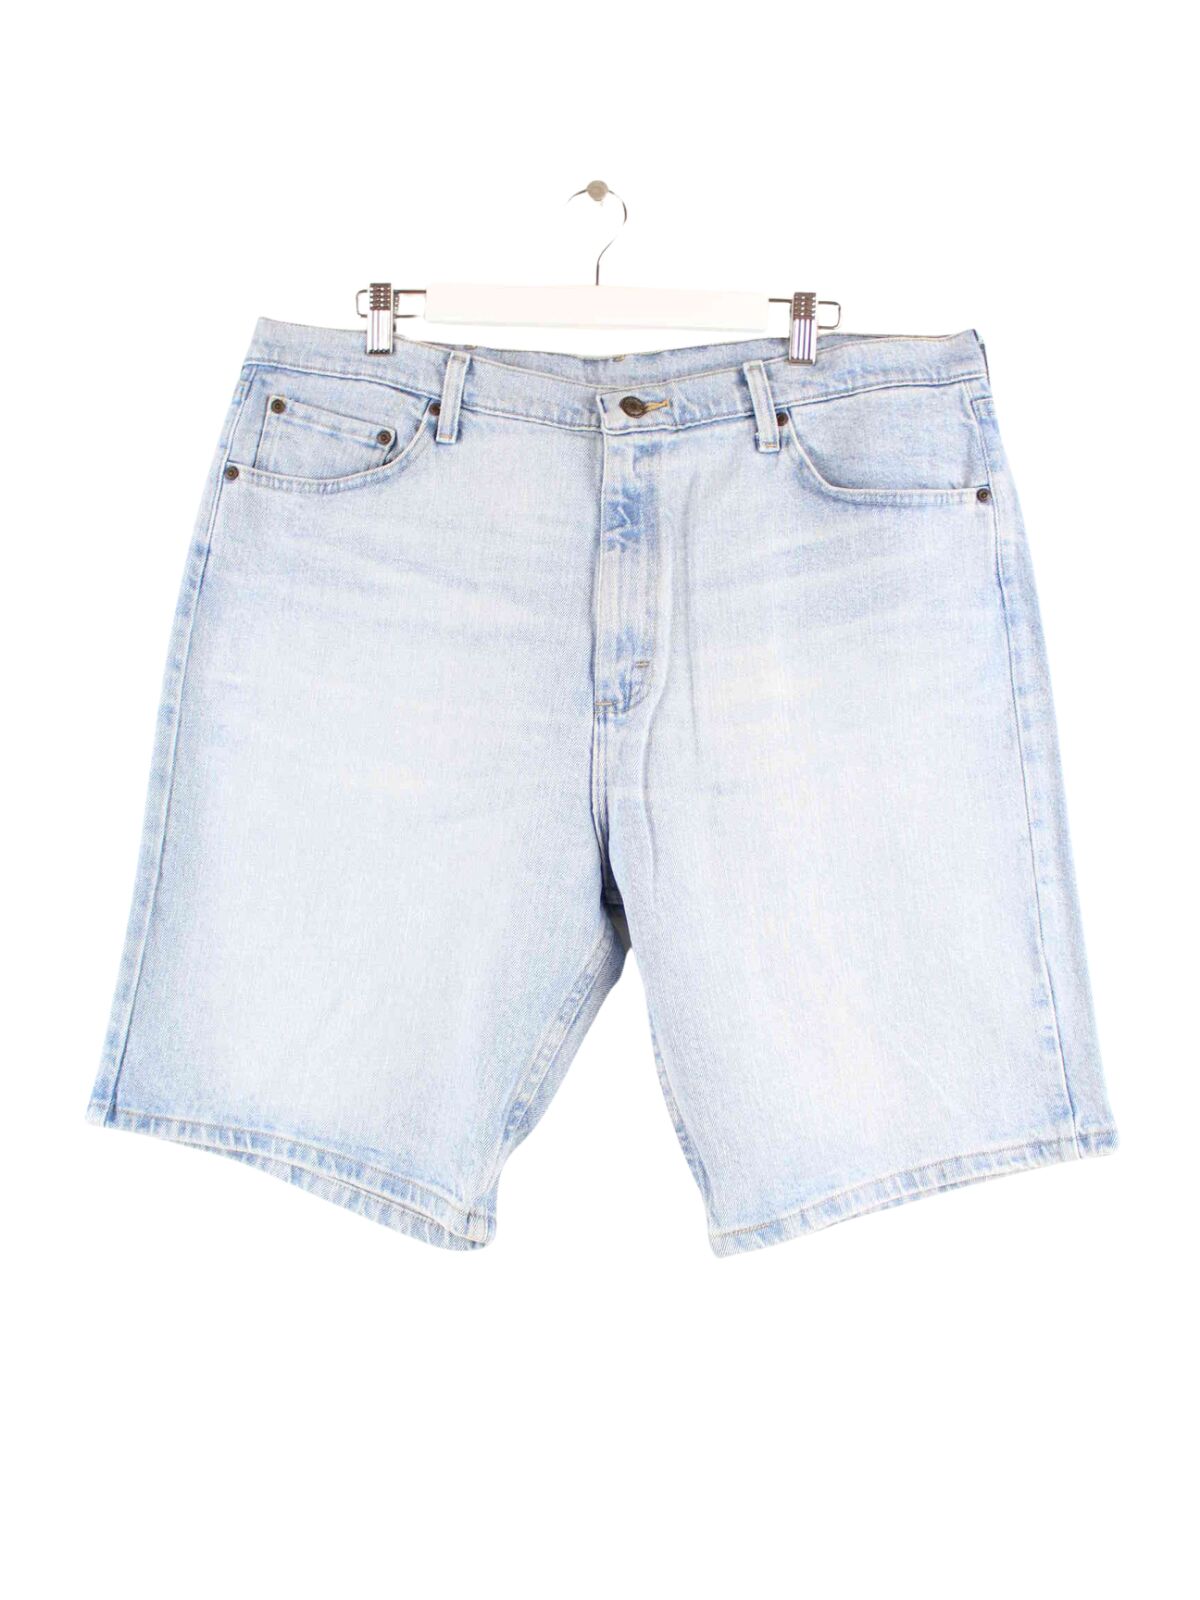 Wrangler y2k Relaxed Fit Shorts Blau W38 (front image)